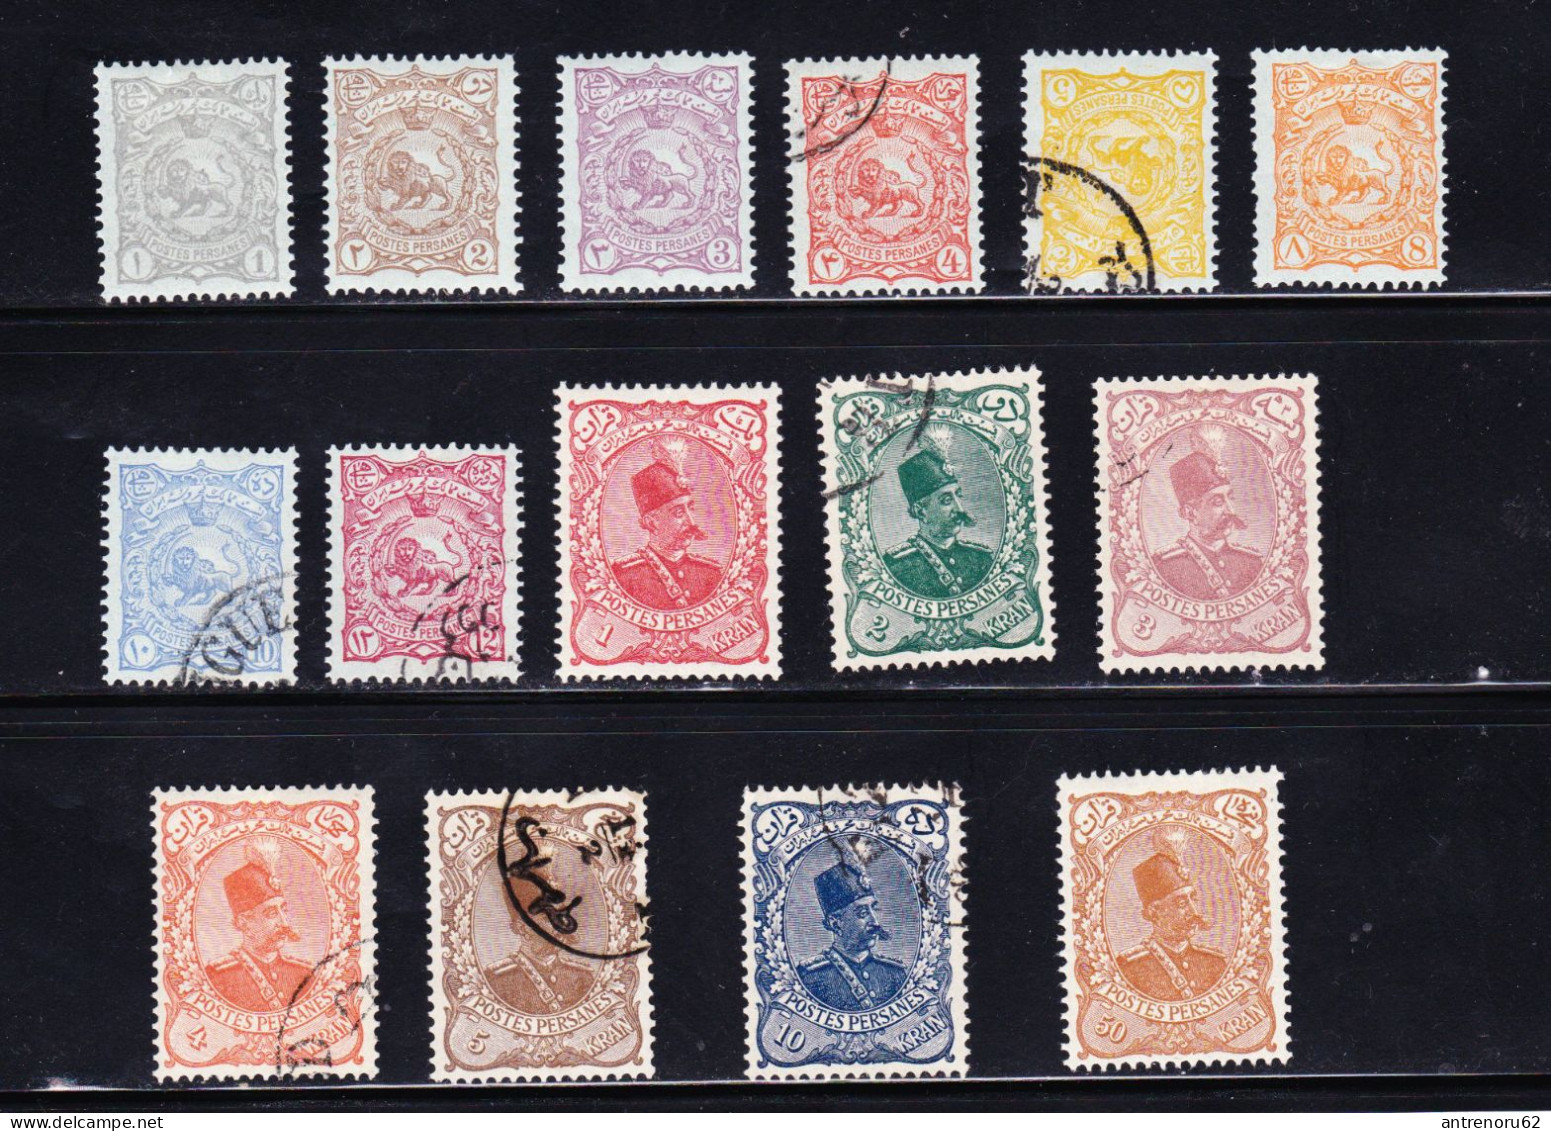 STAMPS-IRAN-1899-UNUSED-MH*-USED-SEE-SCAN - Irán